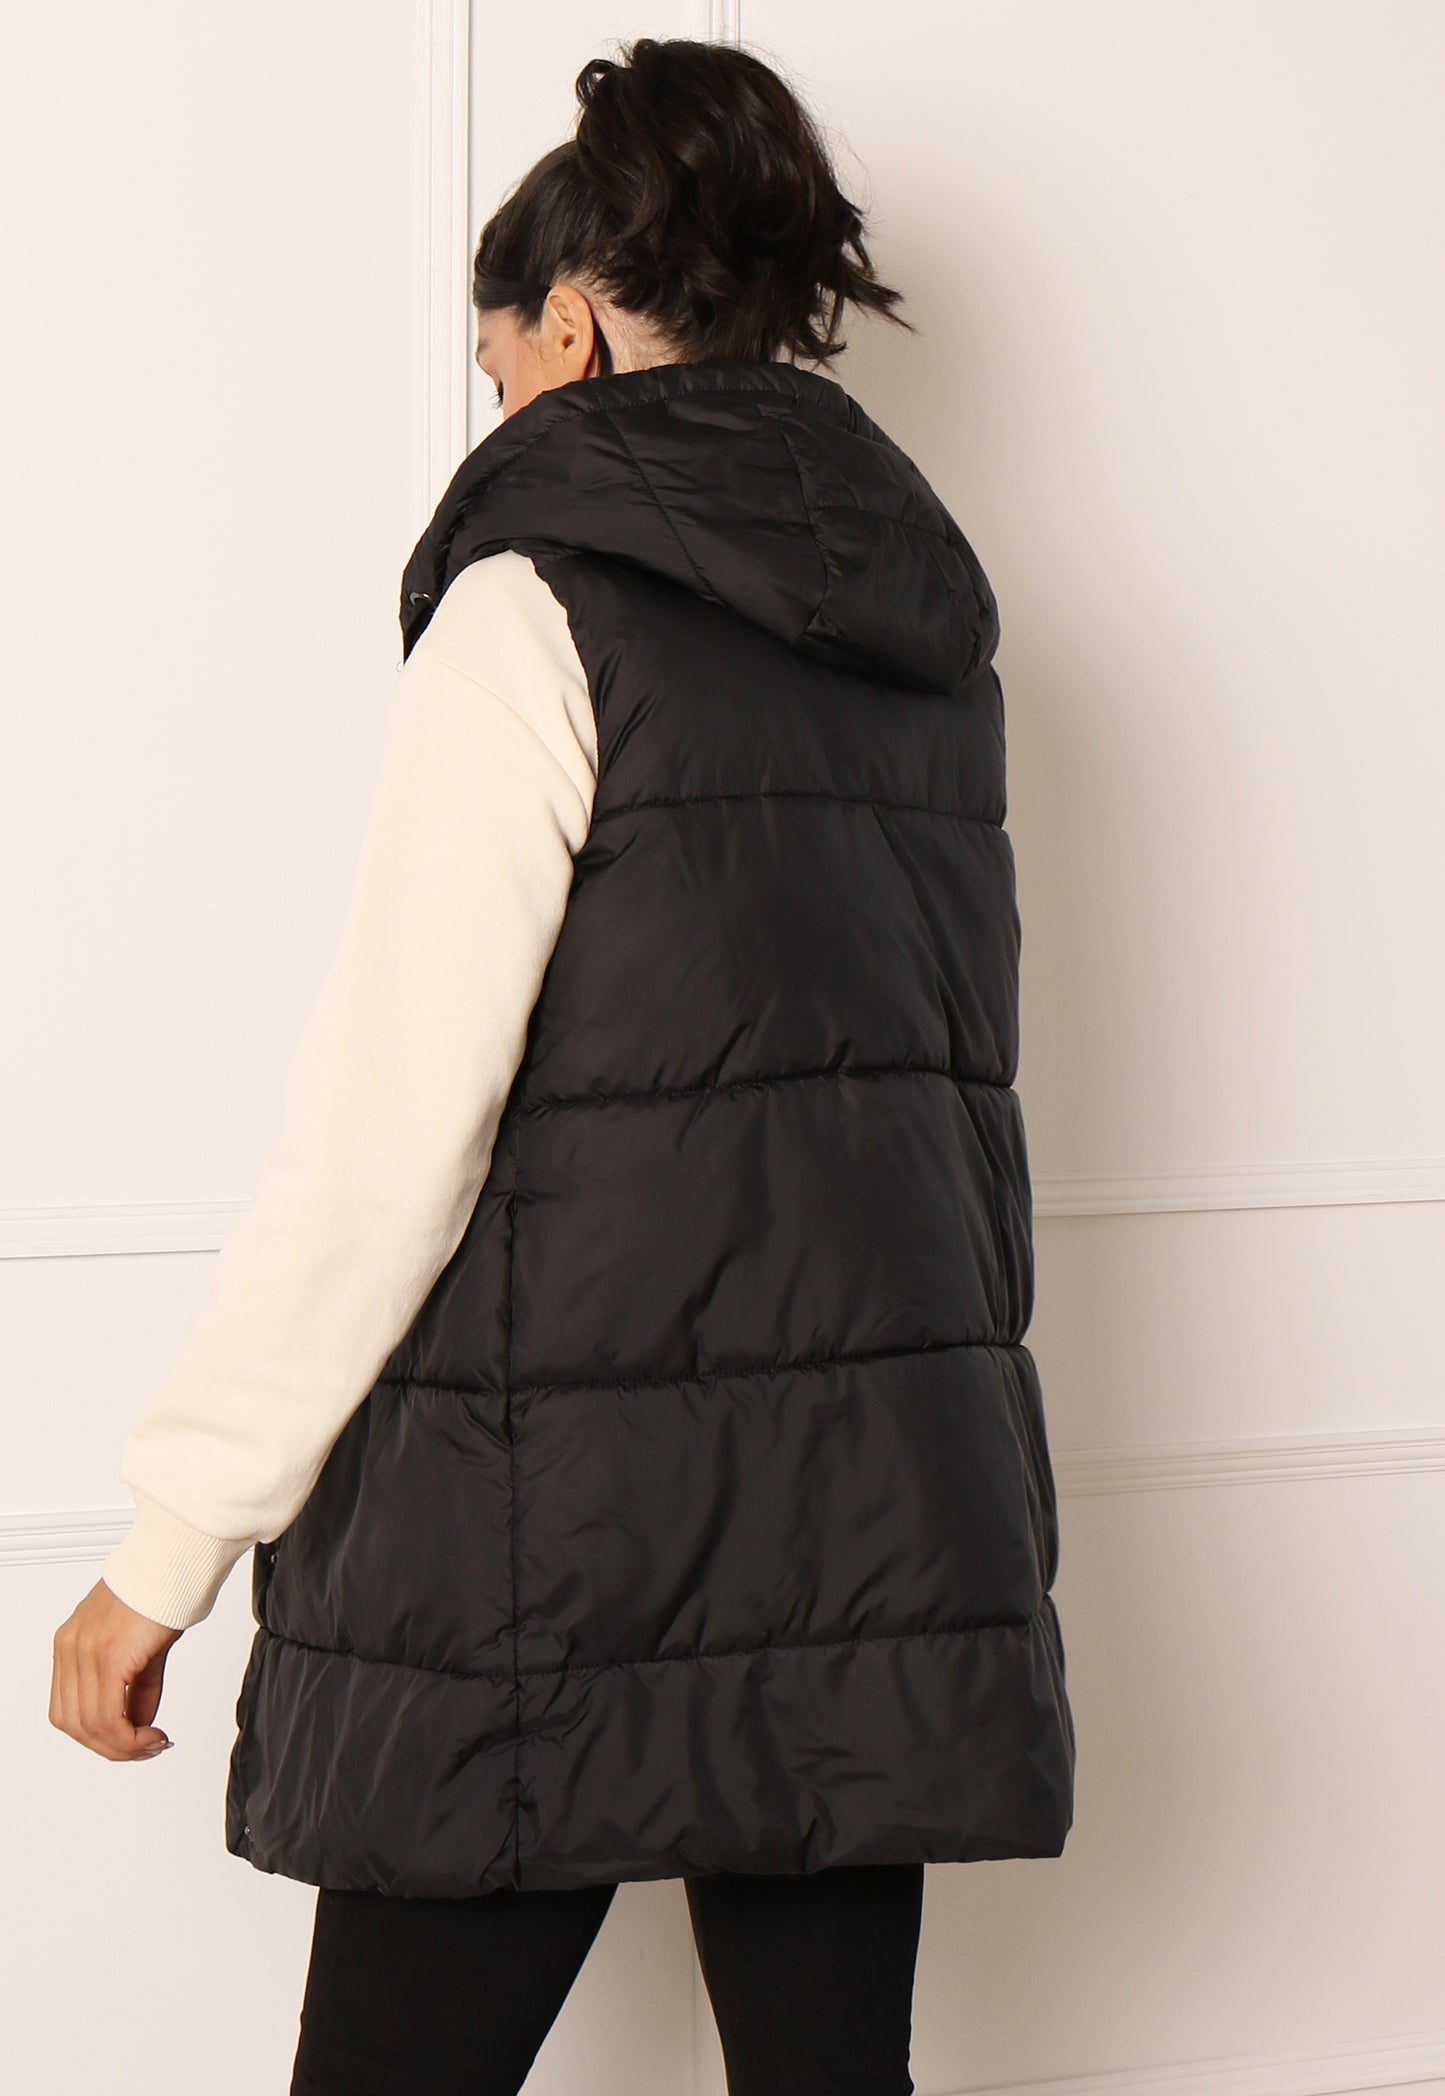 ONLY Asta Longline Sleeveless Puffer Gilet with Hood in Black - concretebartops